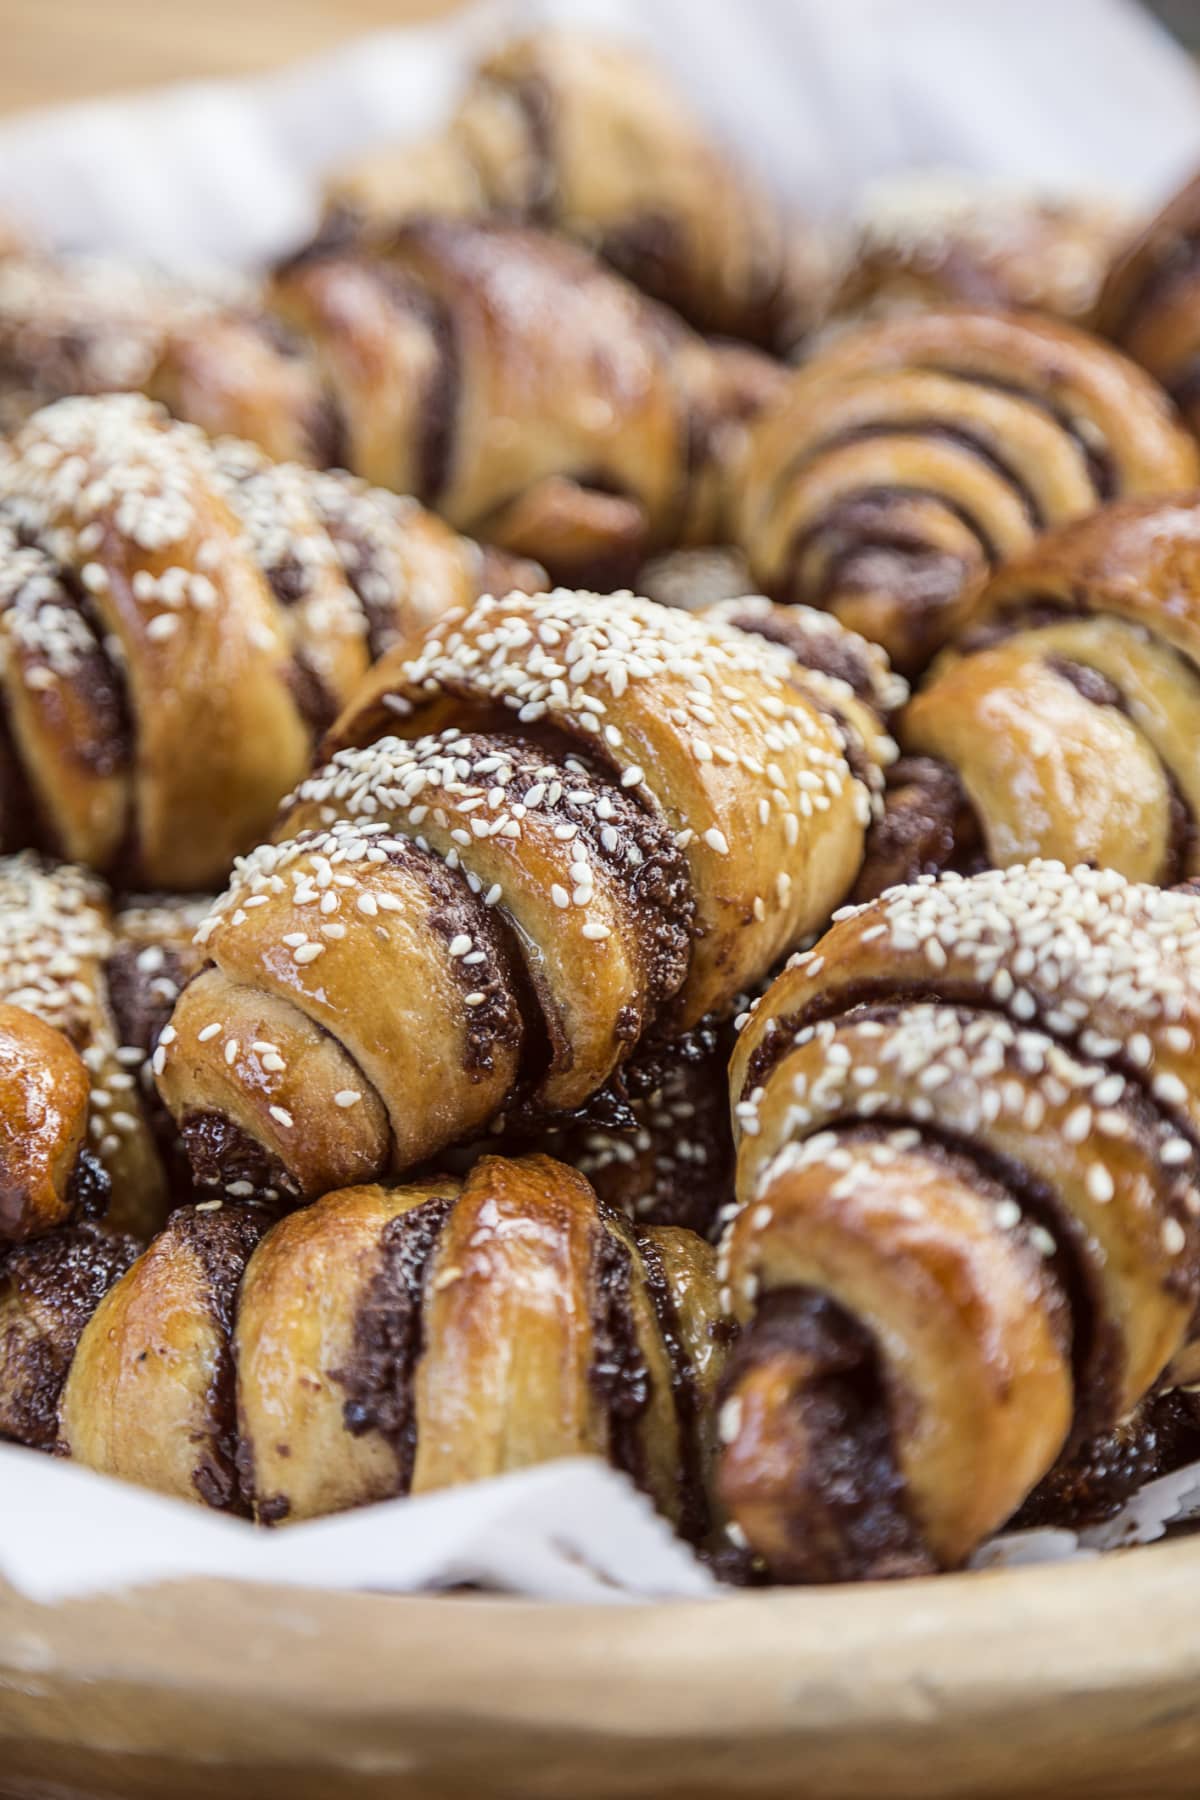 Croissants with chocolate and seeds.